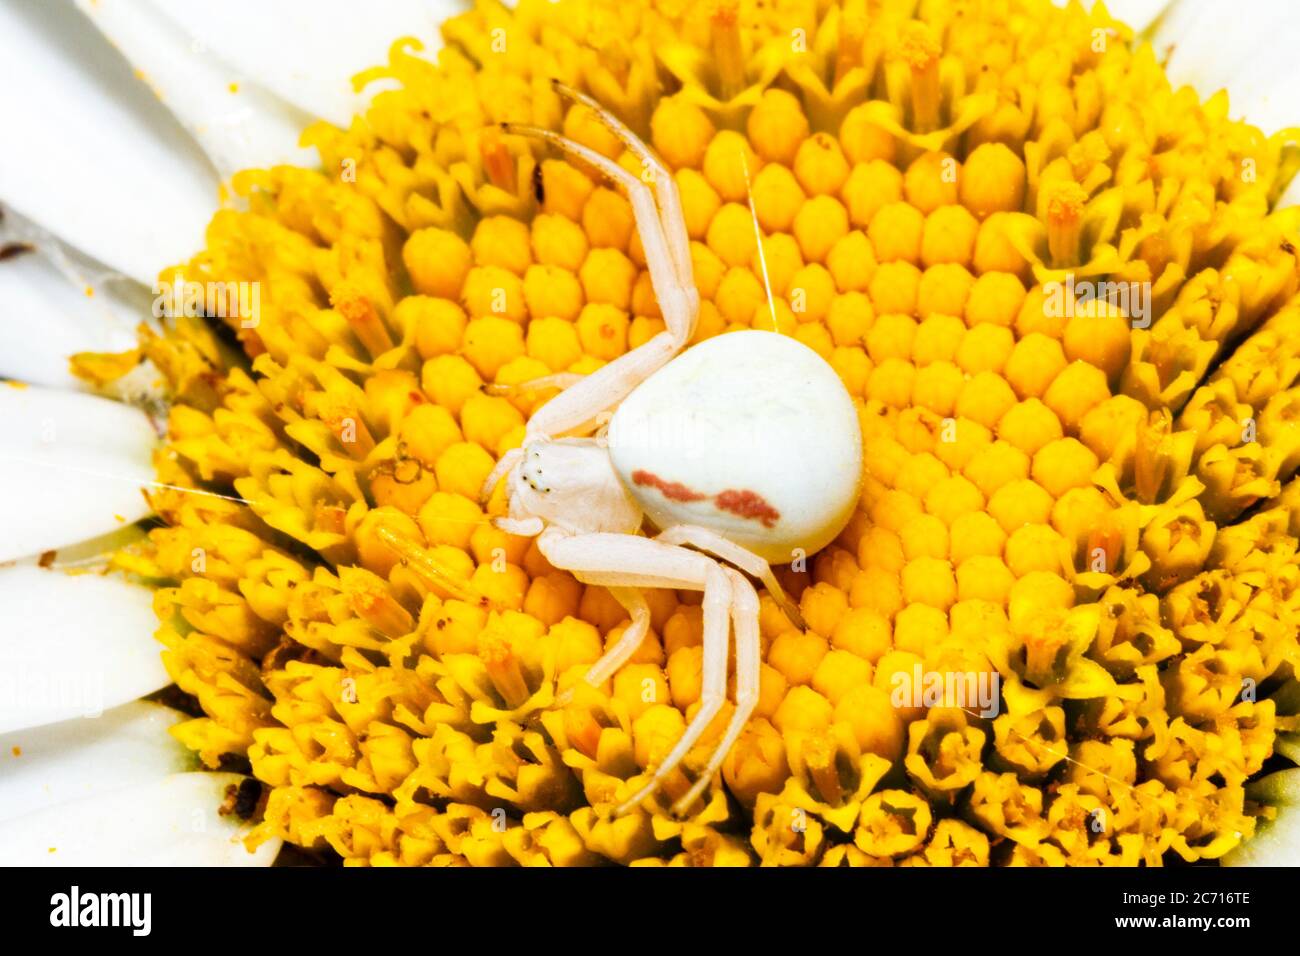 UK weather.A crab spider nestles itself into a Daisy flower this morning on a sunny day in East Sussex, UK.   Credit: Ed Brown/Alamy Live News Stock Photo